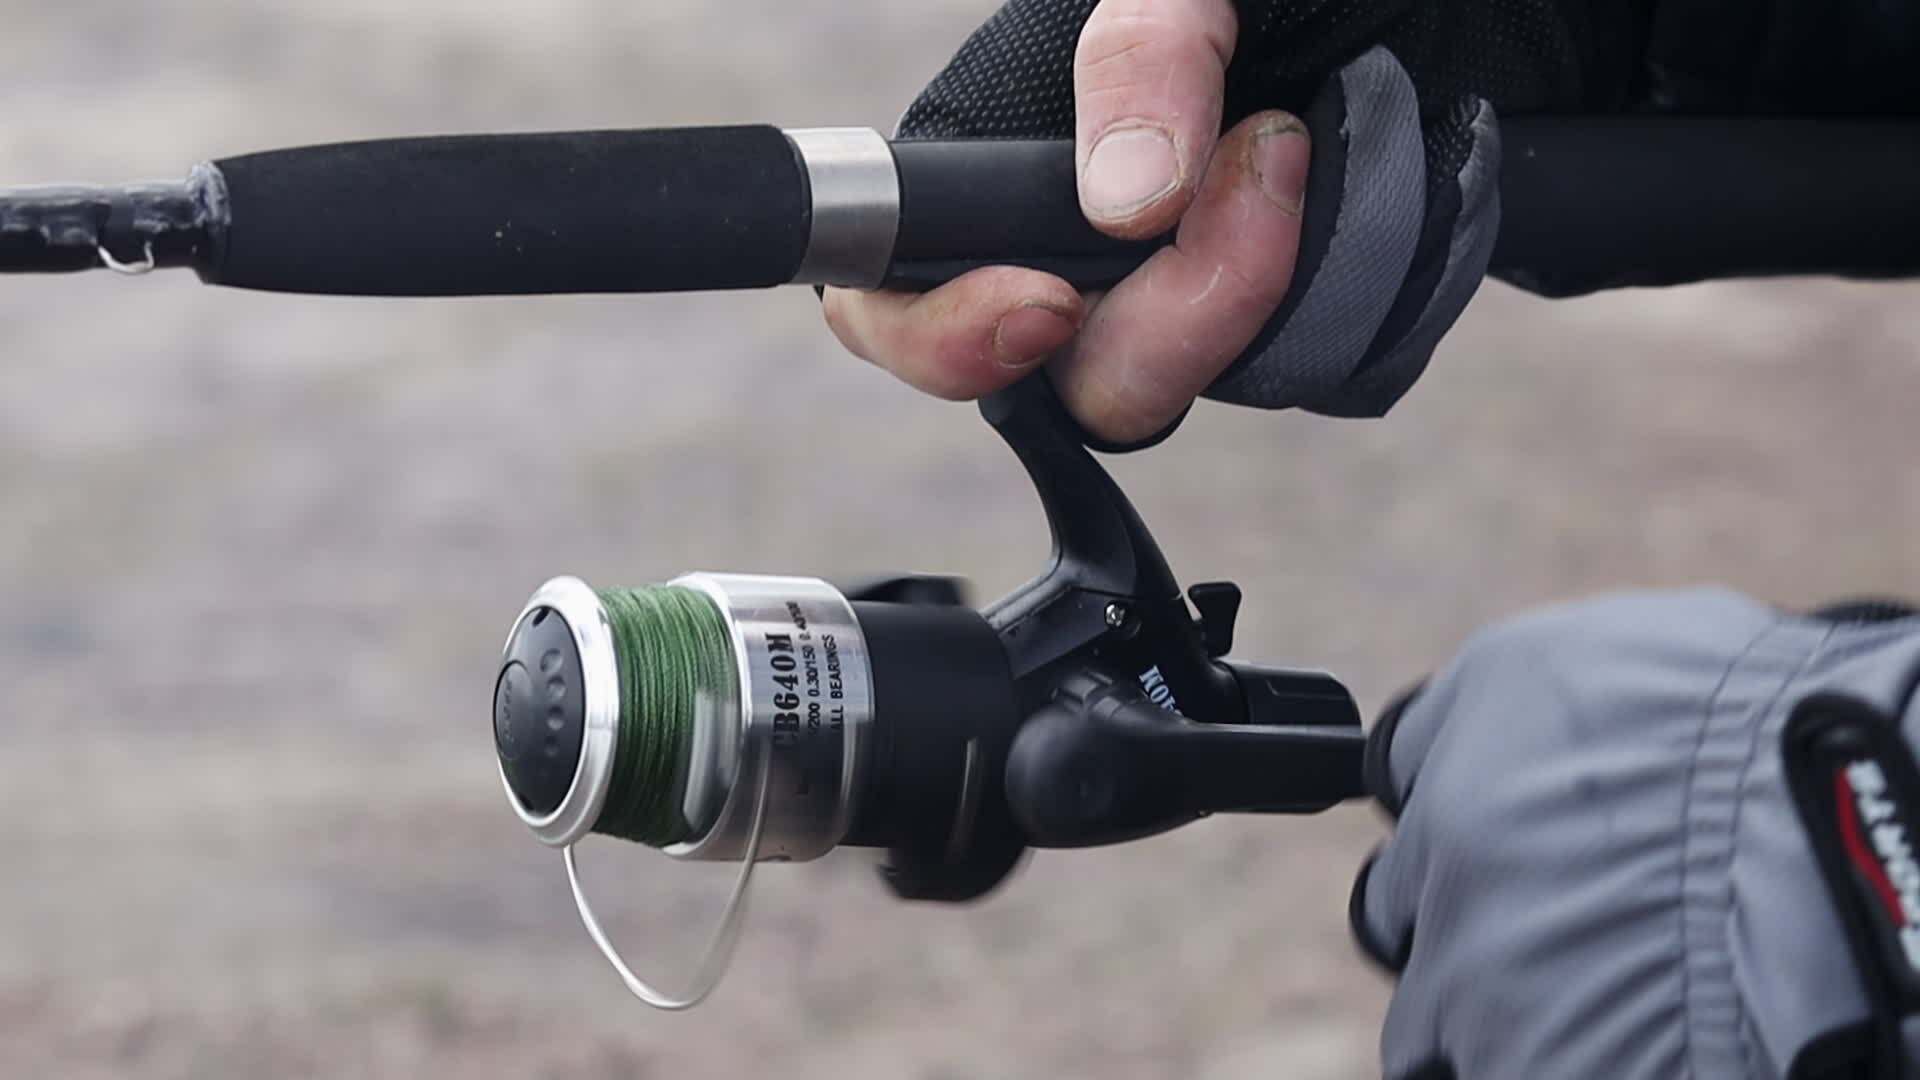 https://static.vecteezy.com/system/resources/thumbnails/027/392/811/original/close-up-of-a-fisherman-s-hands-with-a-spinning-reel-spin-fishing-reel-a-man-spins-a-reel-while-fishing-close-up-of-hands-and-reel-vacation-and-hobby-concept-ukraine-kyiv-march-5-2023-free-video.jpg